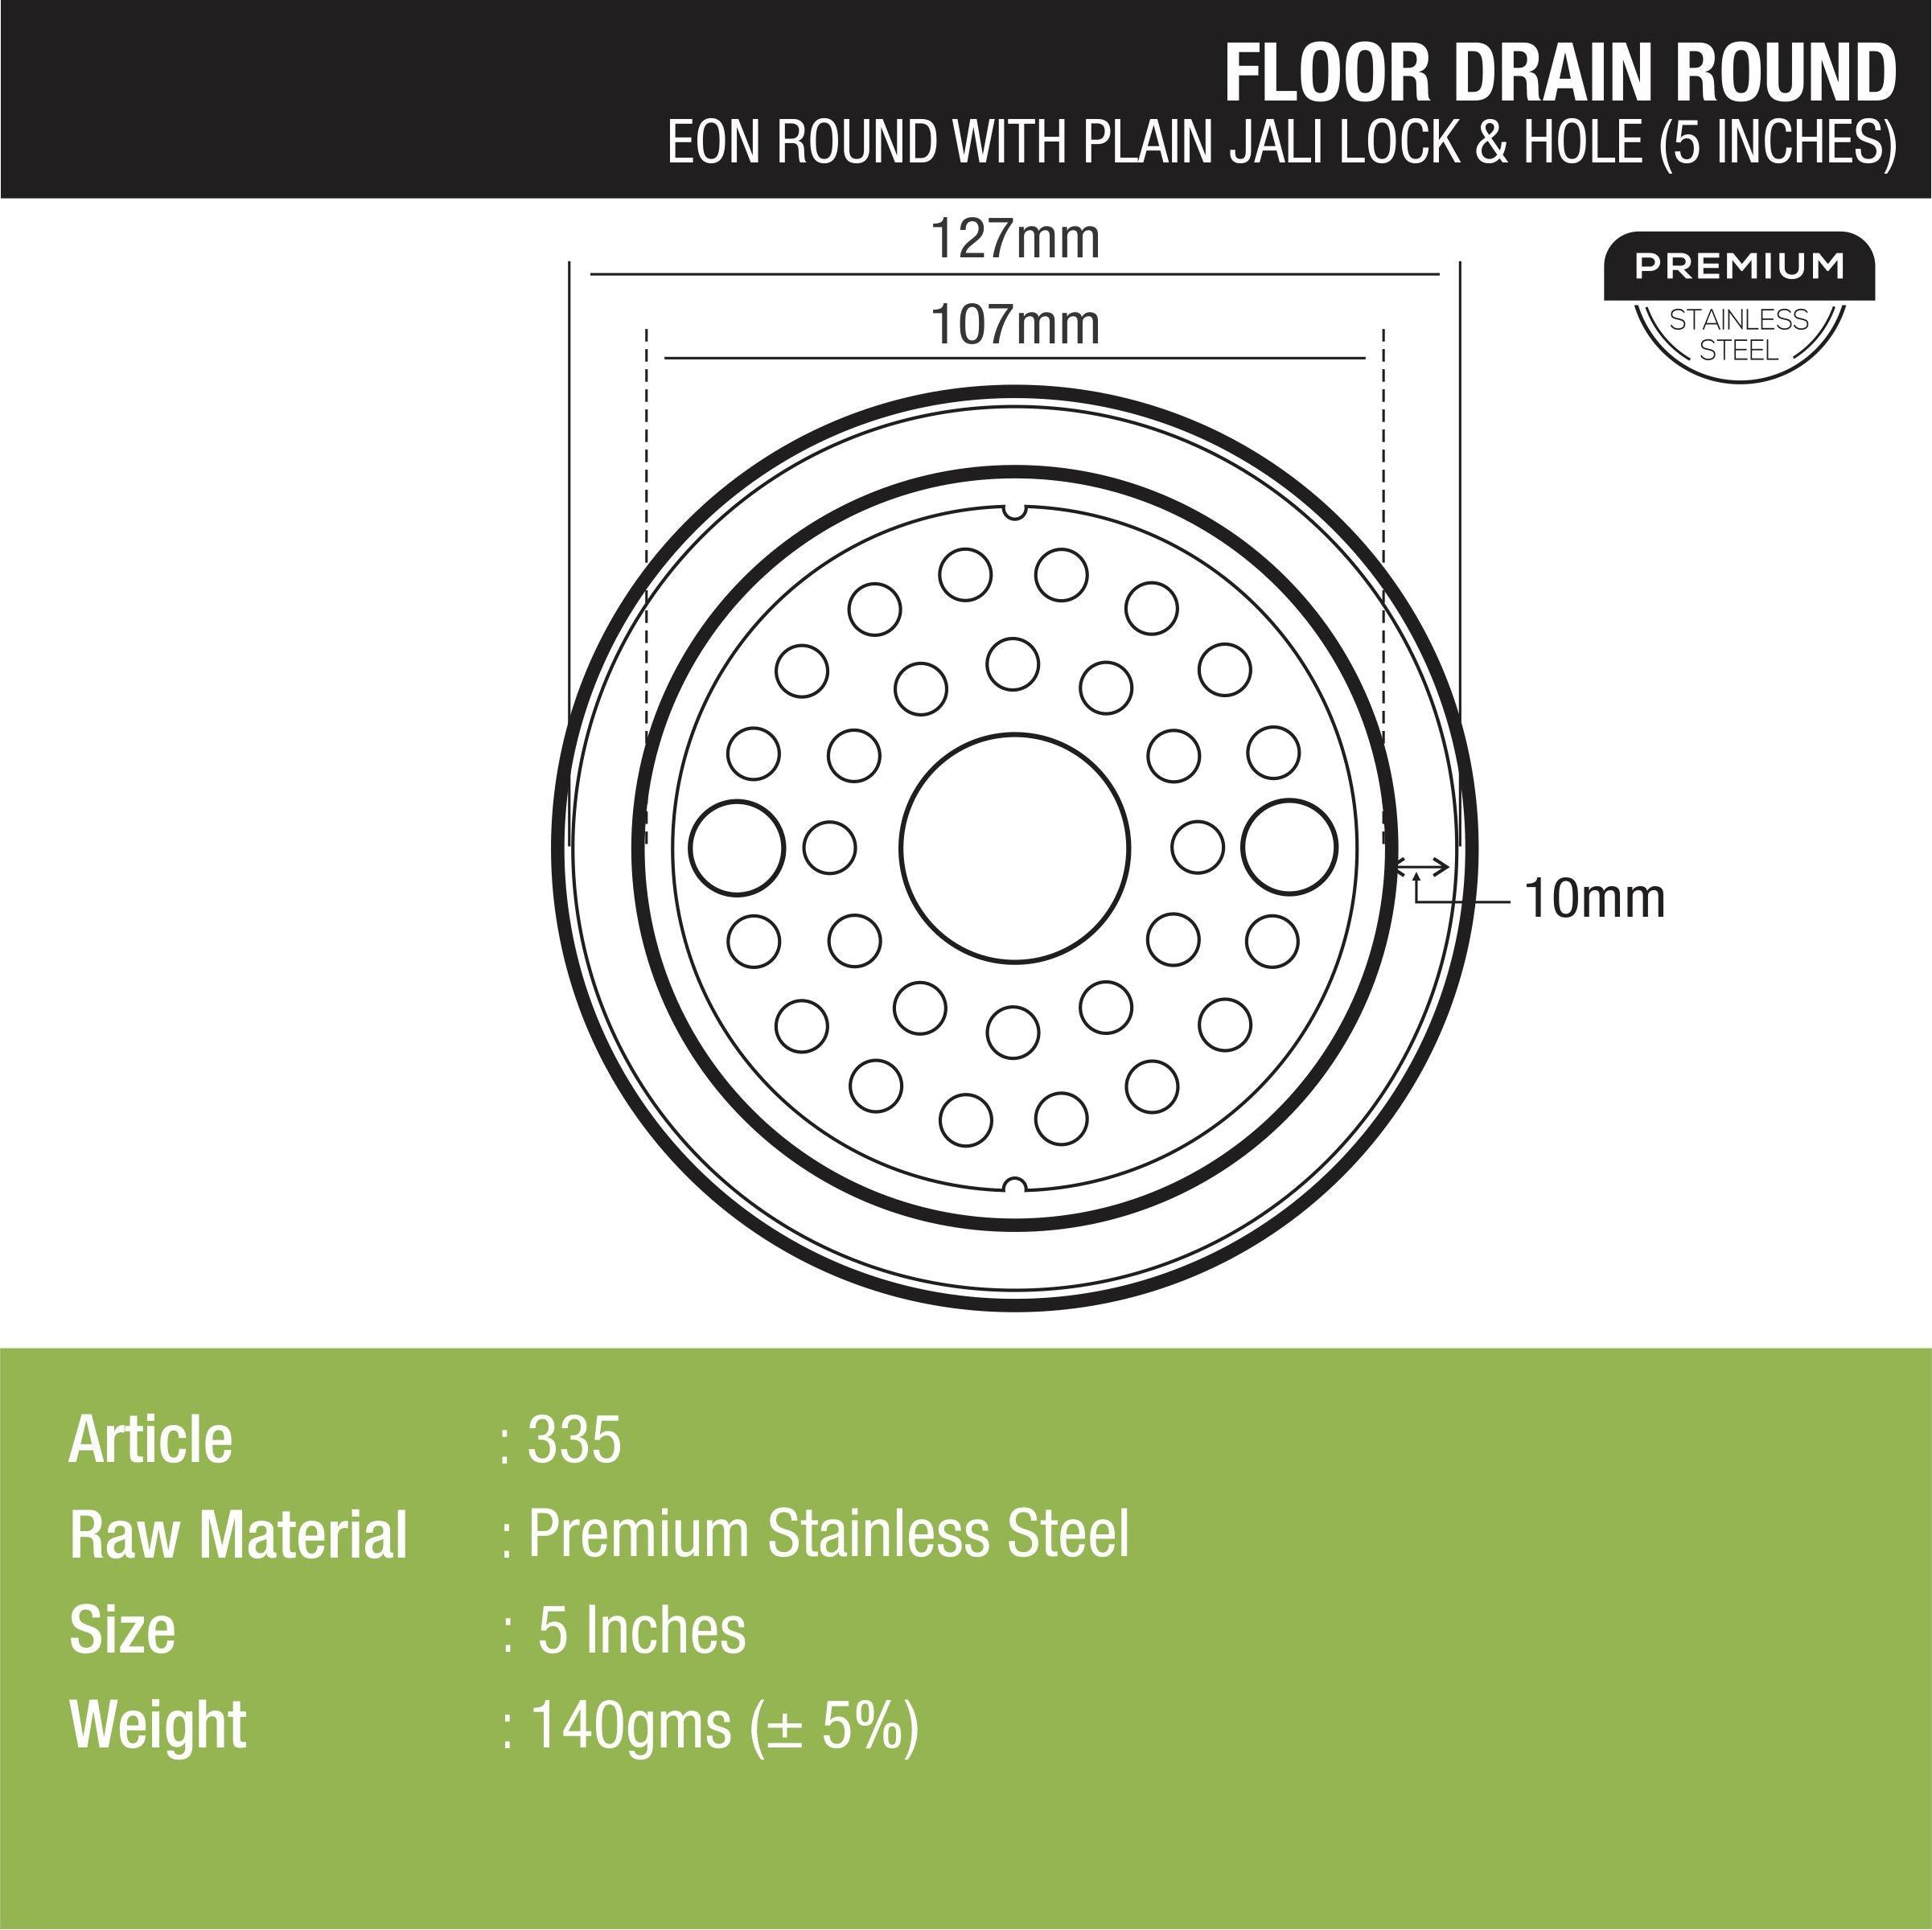 Eon Round Floor Drain with Plain Jali, Lock & Hole (5 inches) dimensions and sizes